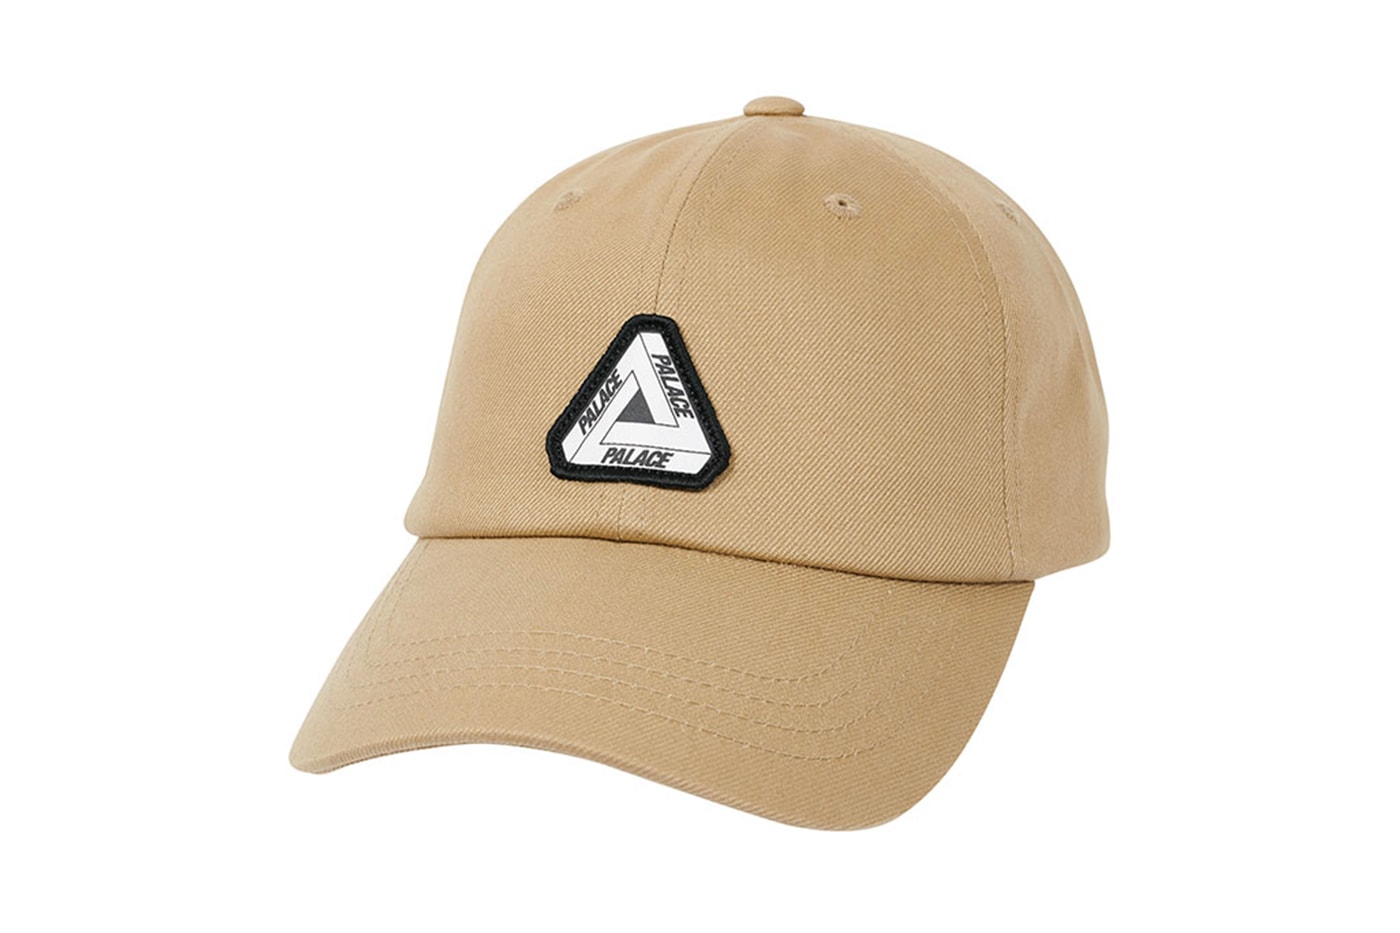 Palace Fall 2020 Hats Caps beanies collection release info